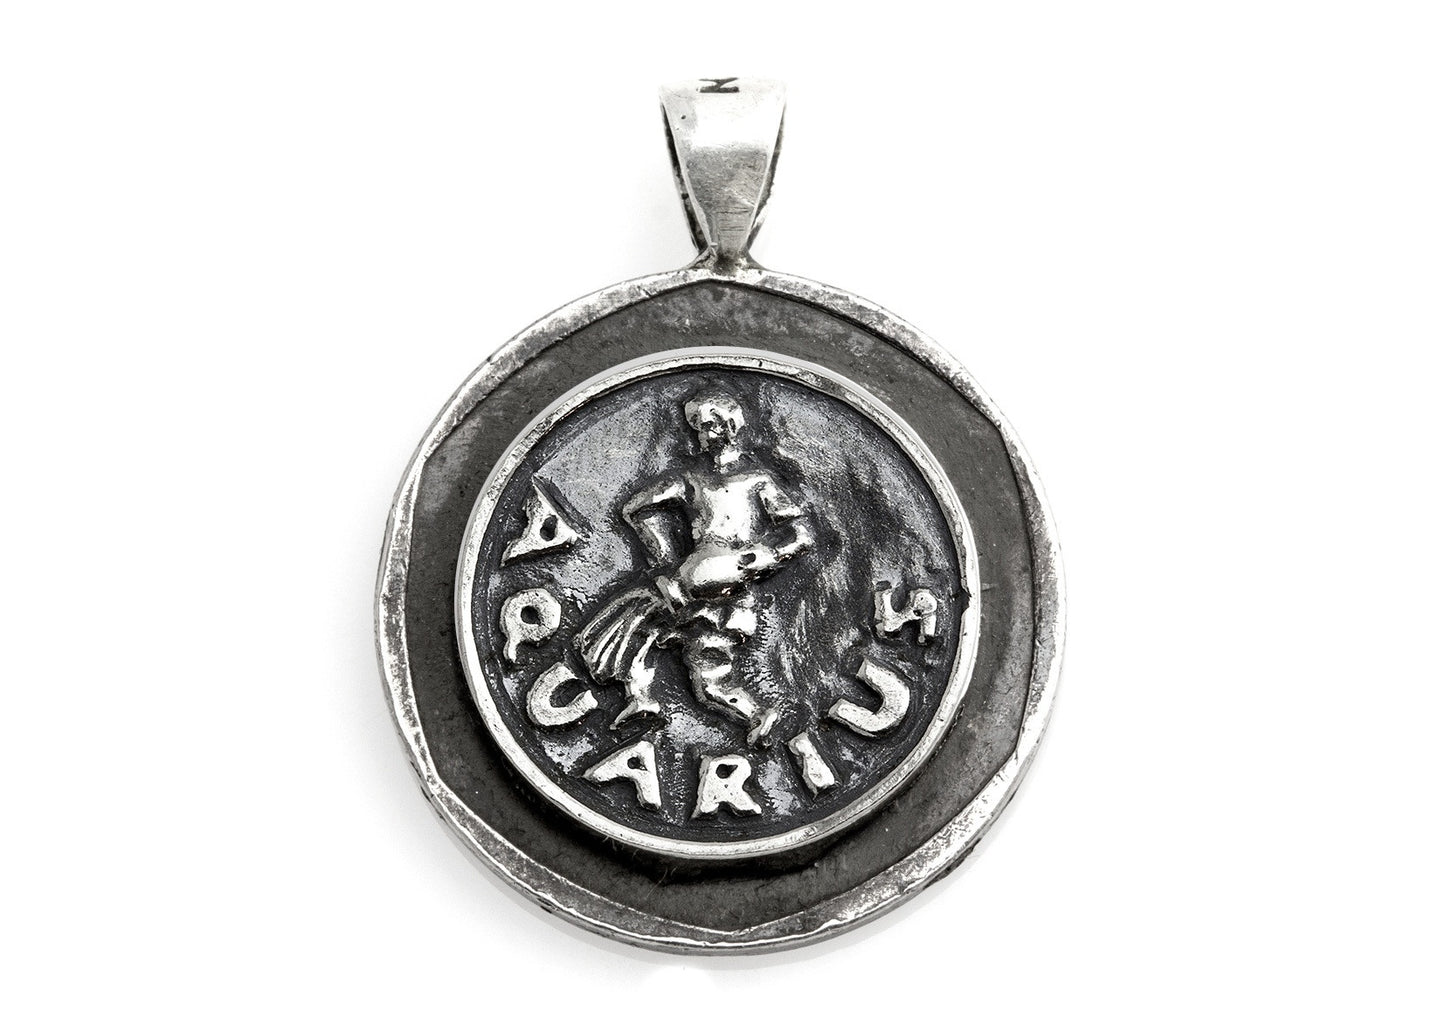 Aquarius Medallion on an Old 10 Sheqel Coin of Israel